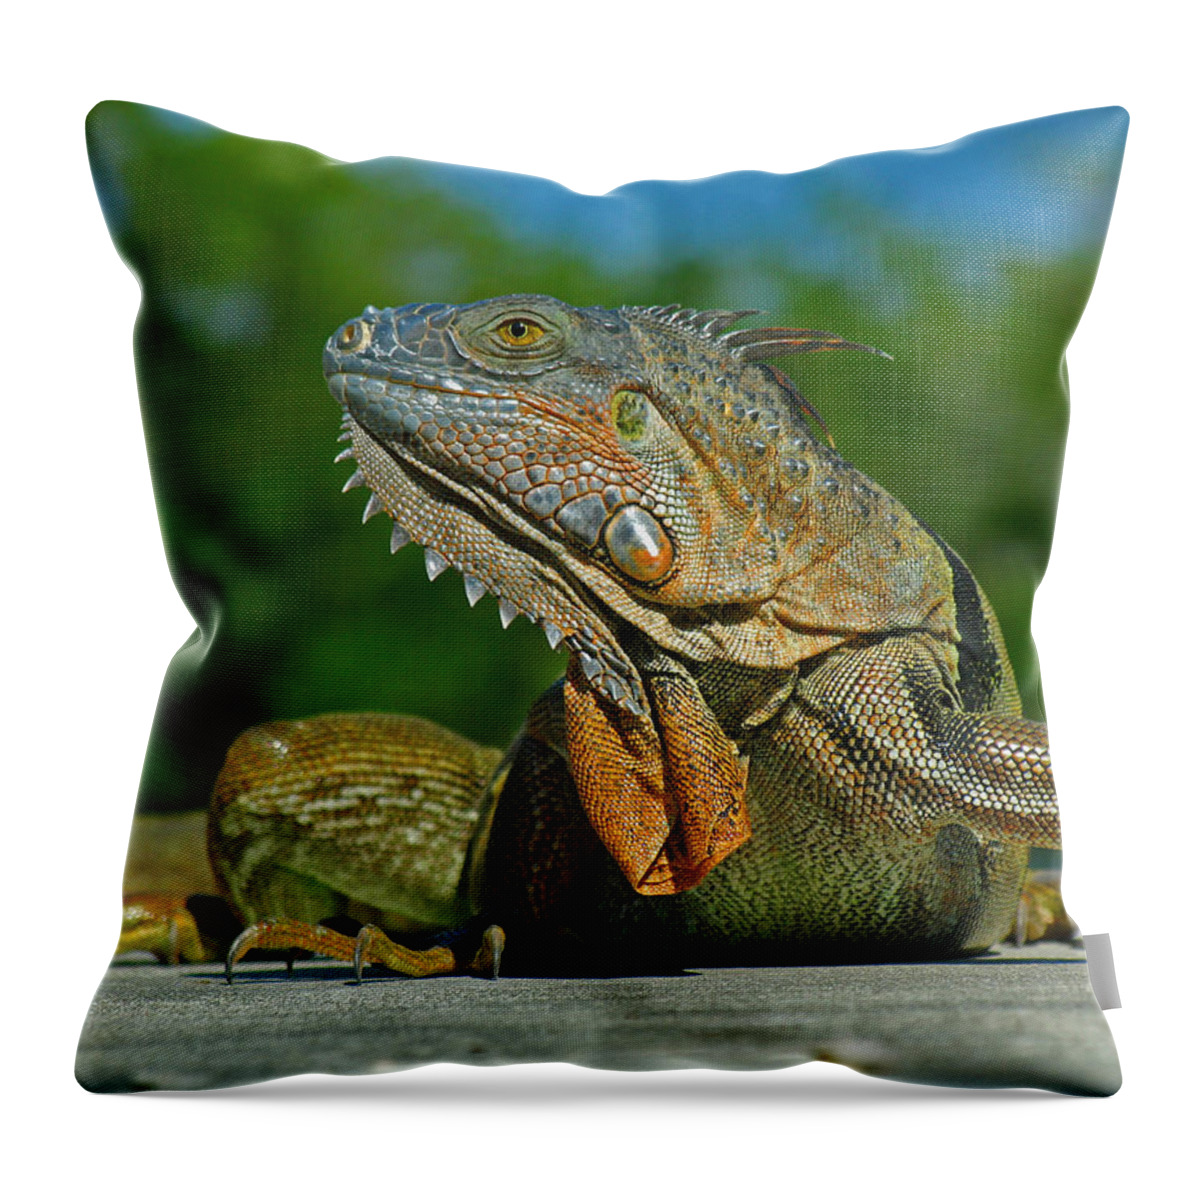 Animal Throw Pillow featuring the photograph Iguana by Juergen Roth